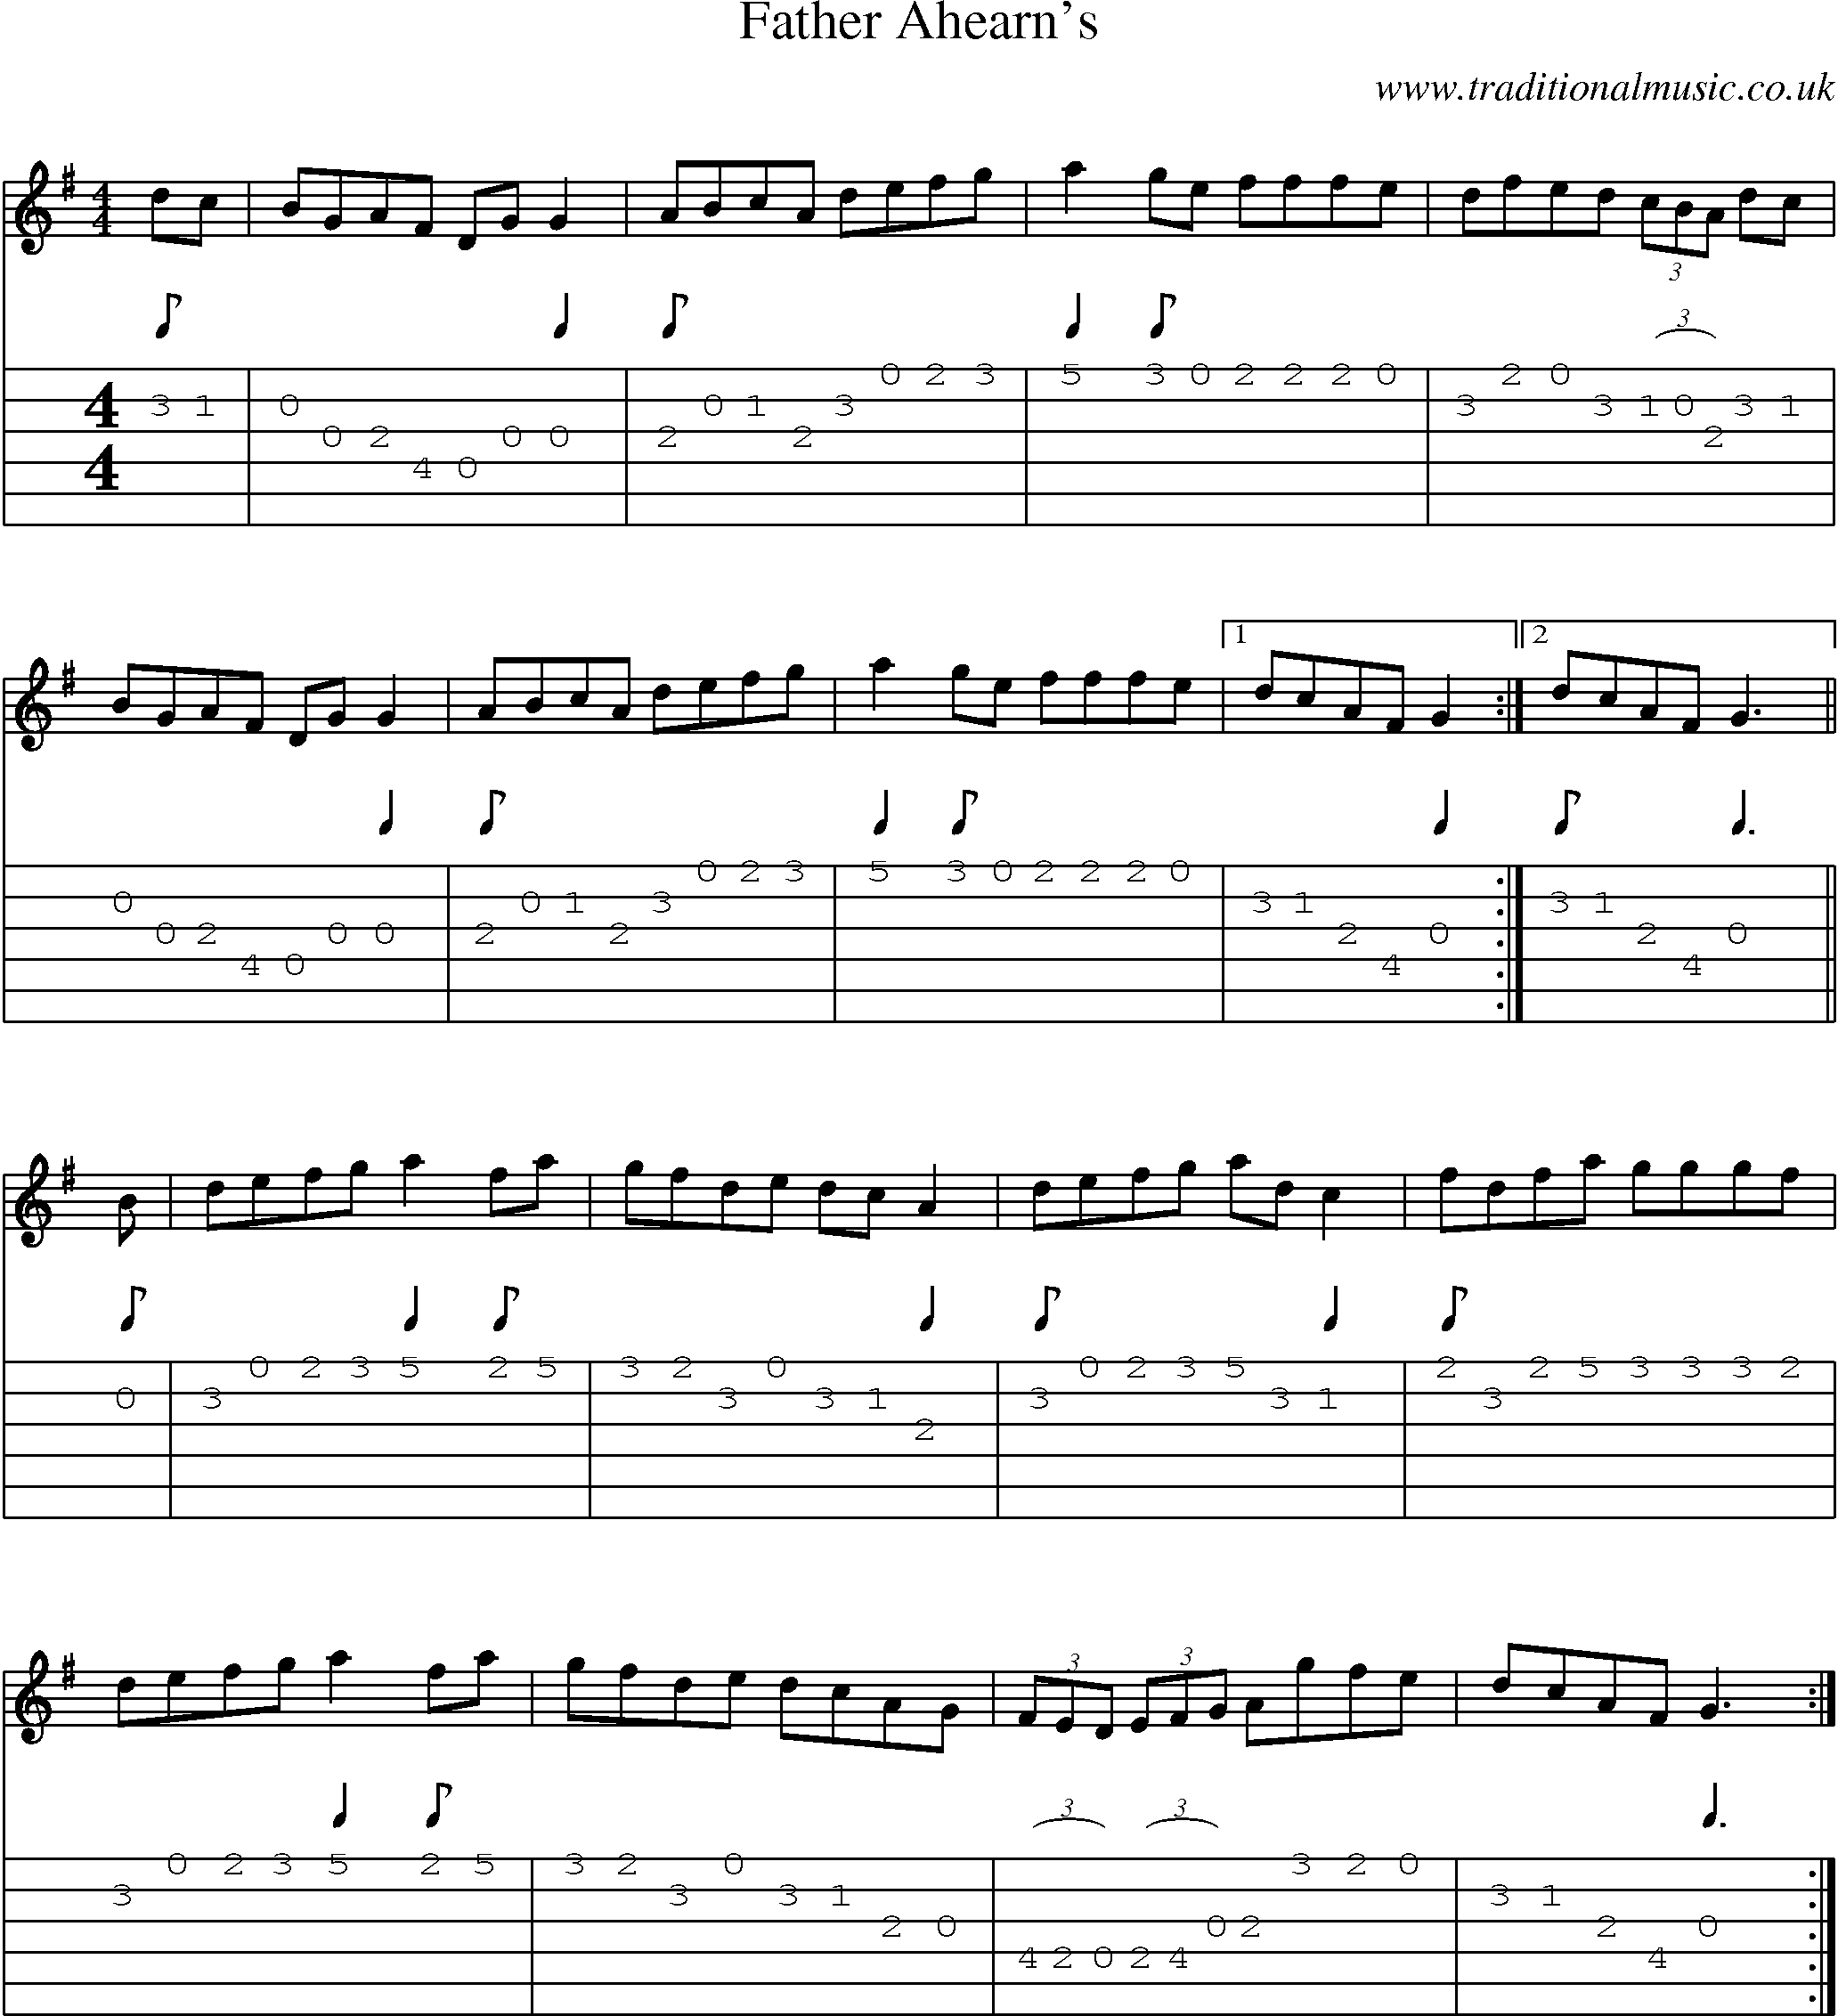 Music Score and Guitar Tabs for Father Ahearns